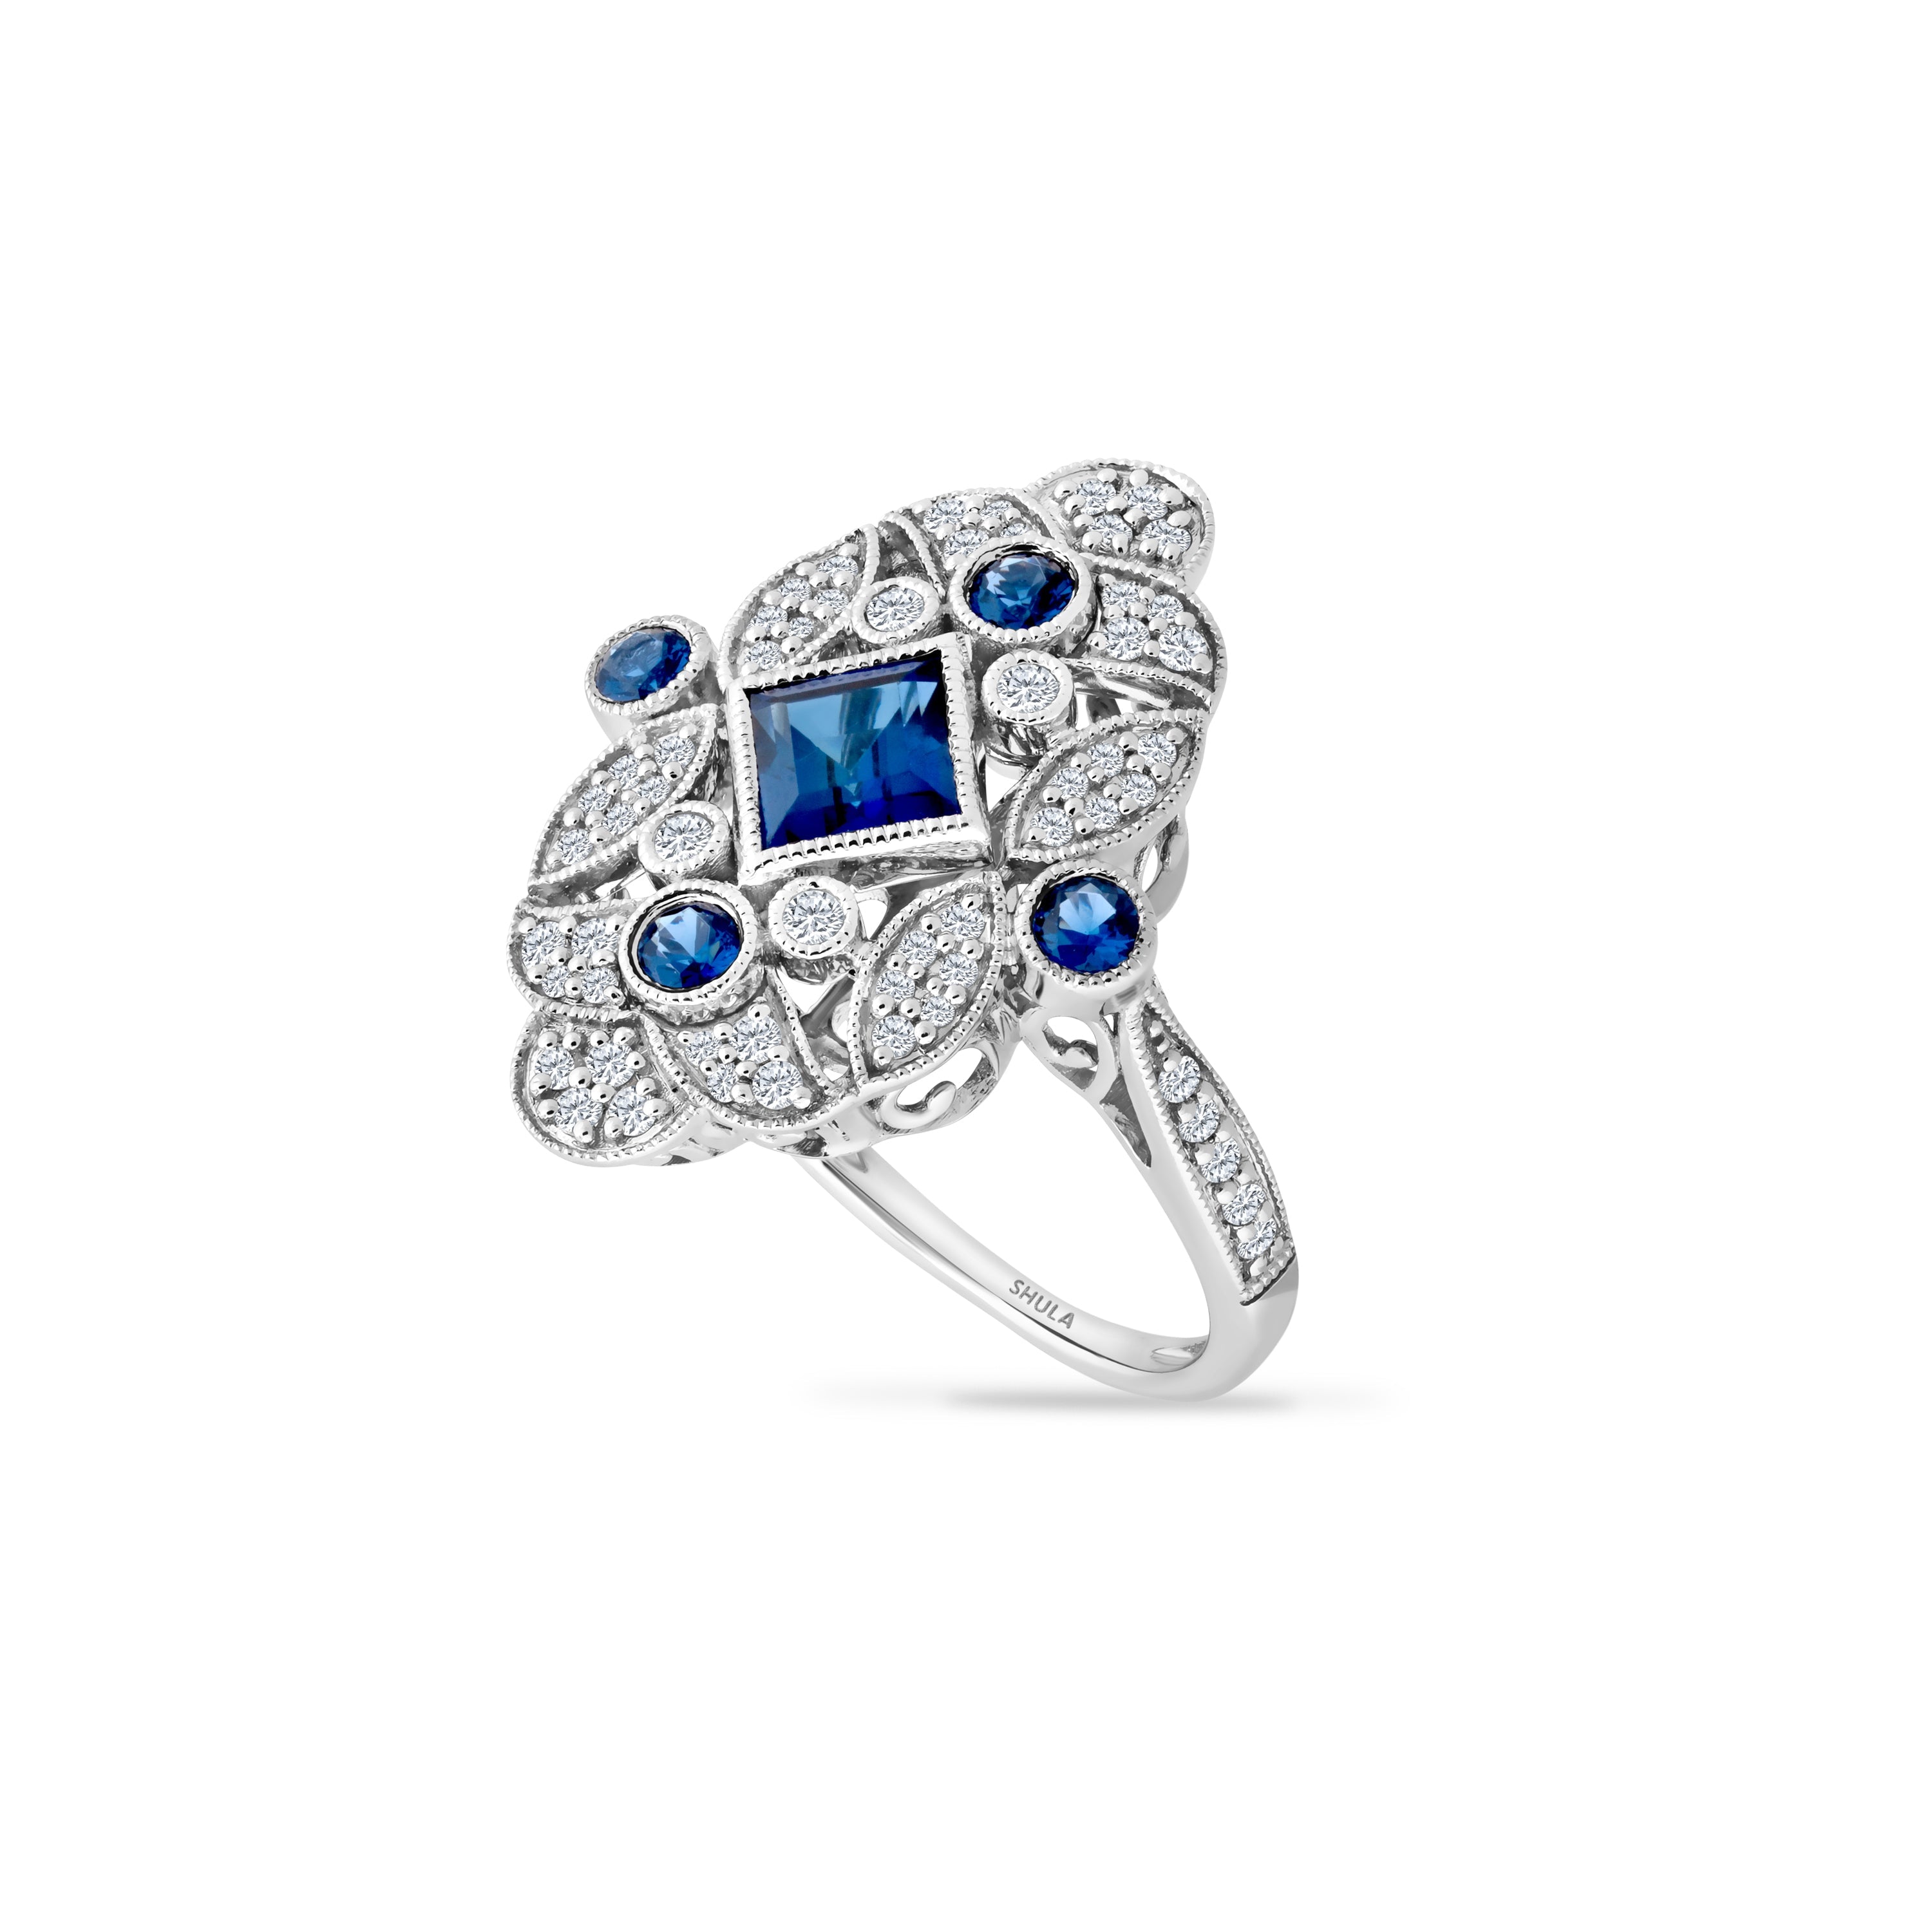 14K RING WITH SQUARE SAPPHIRE 1.02CT, BLUE SAPPHIRES 0.28CT & DIAMONDS 0.38CT